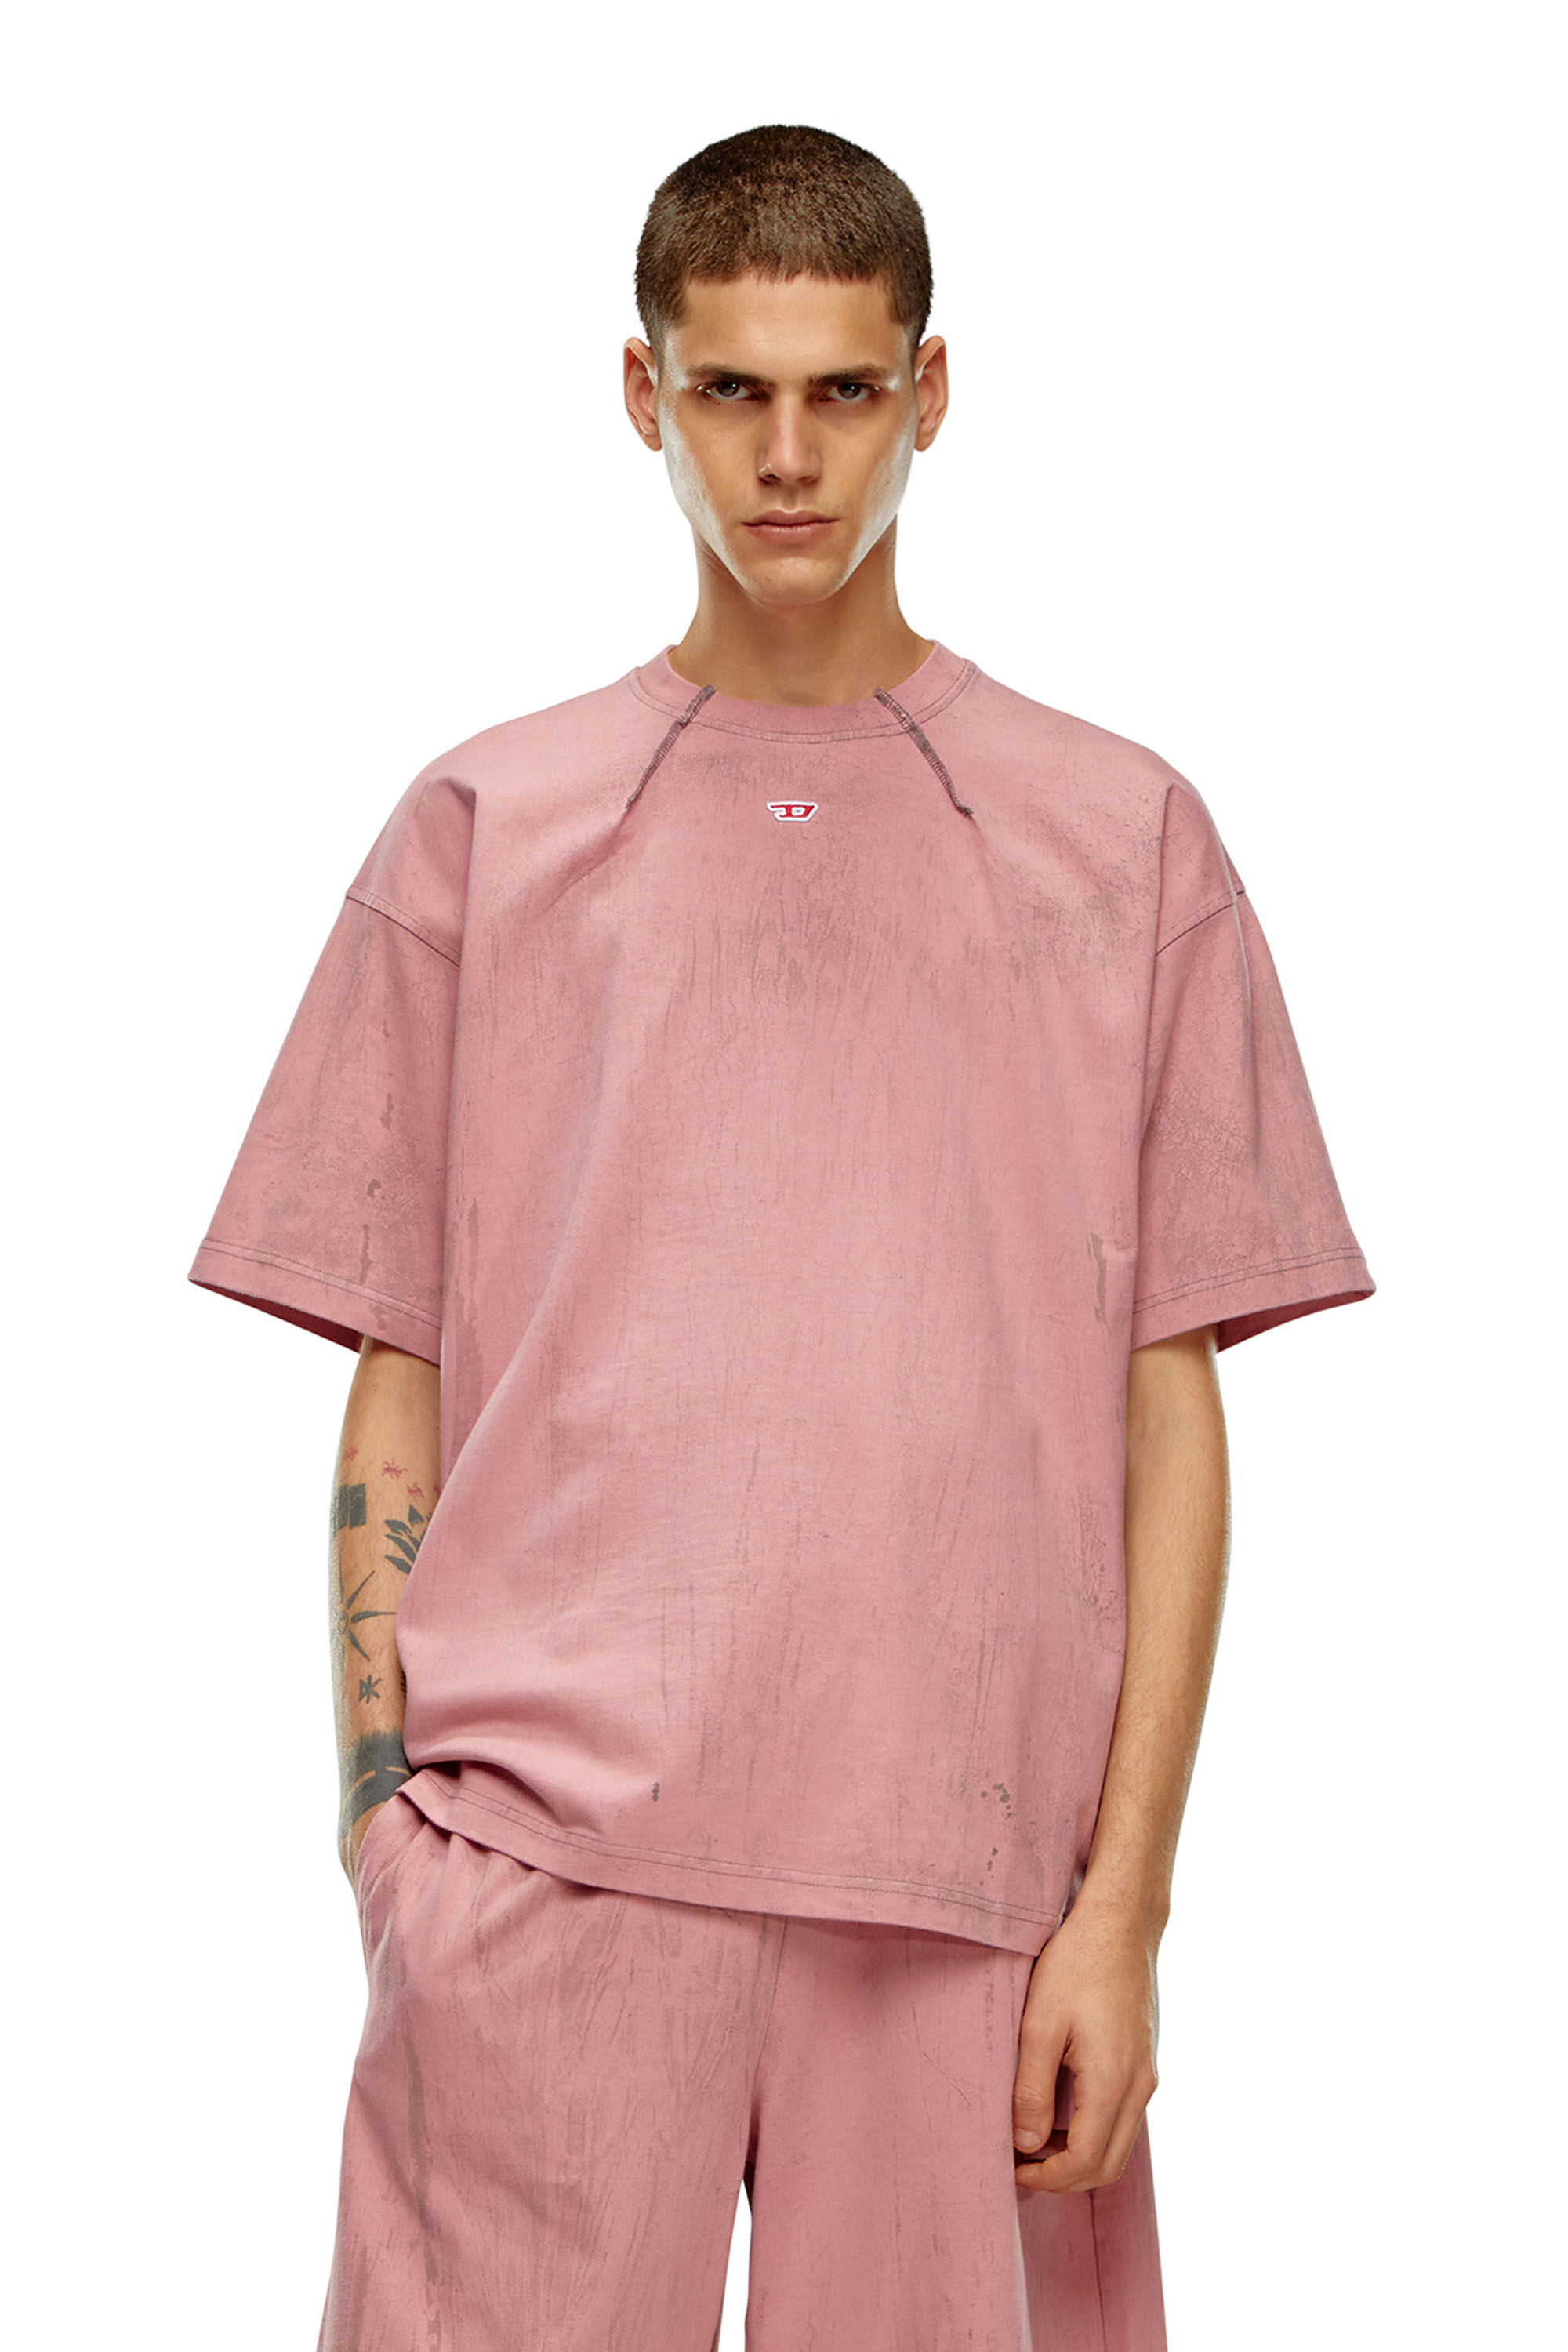 Diesel - T-COS, Man T-shirt in plaster effect jersey in Pink - Image 3